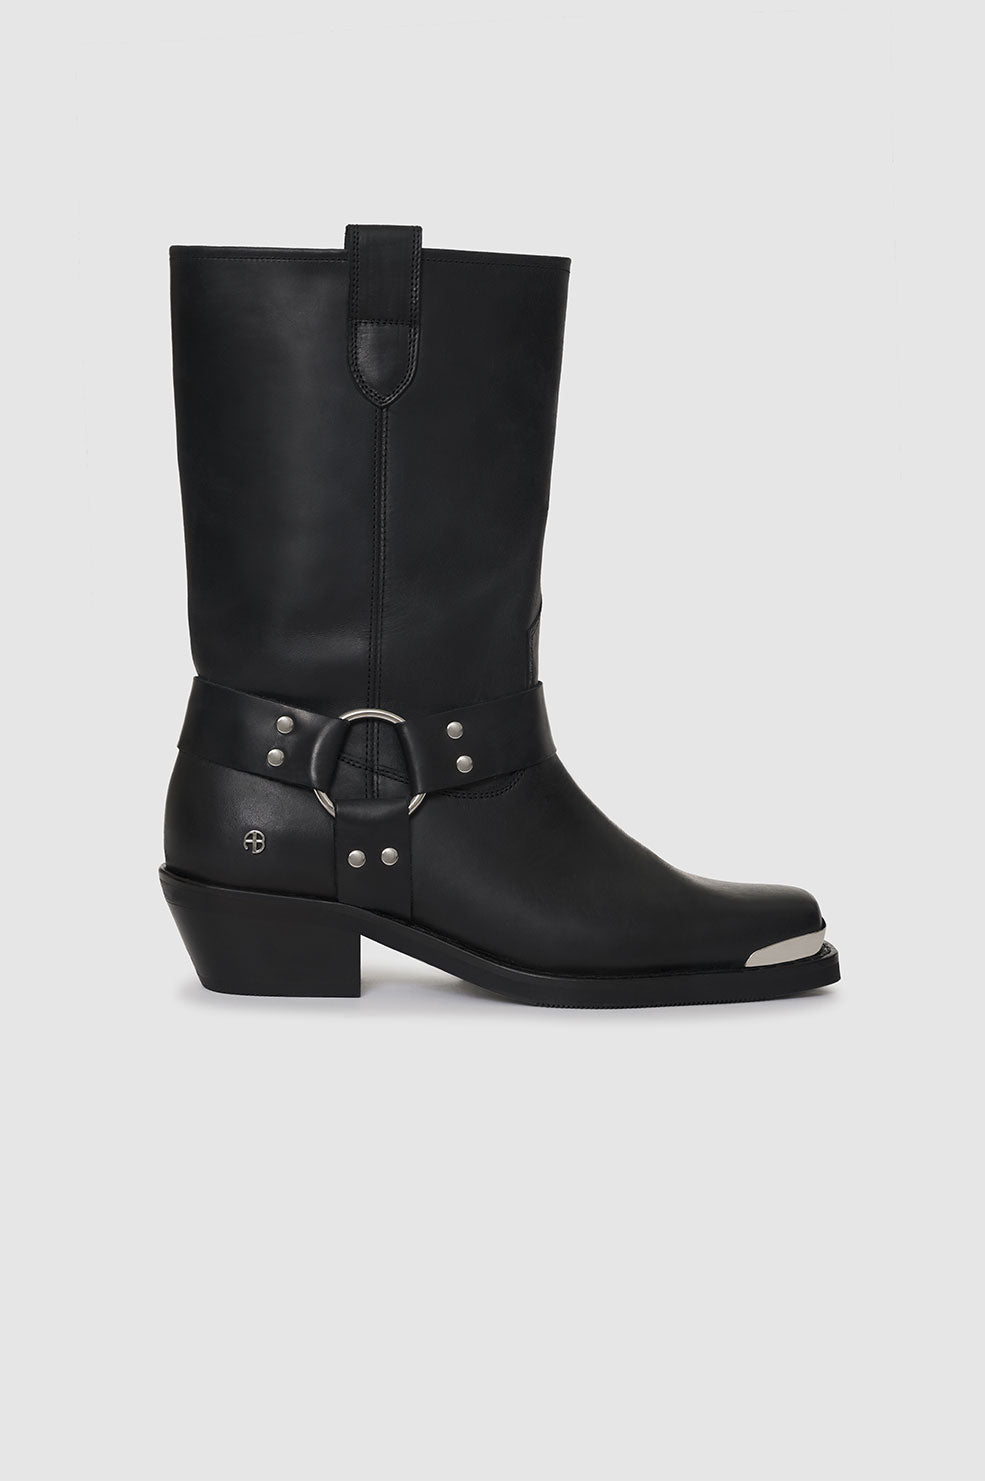 ANINE BING Ryder Boots - Black - Side Single View